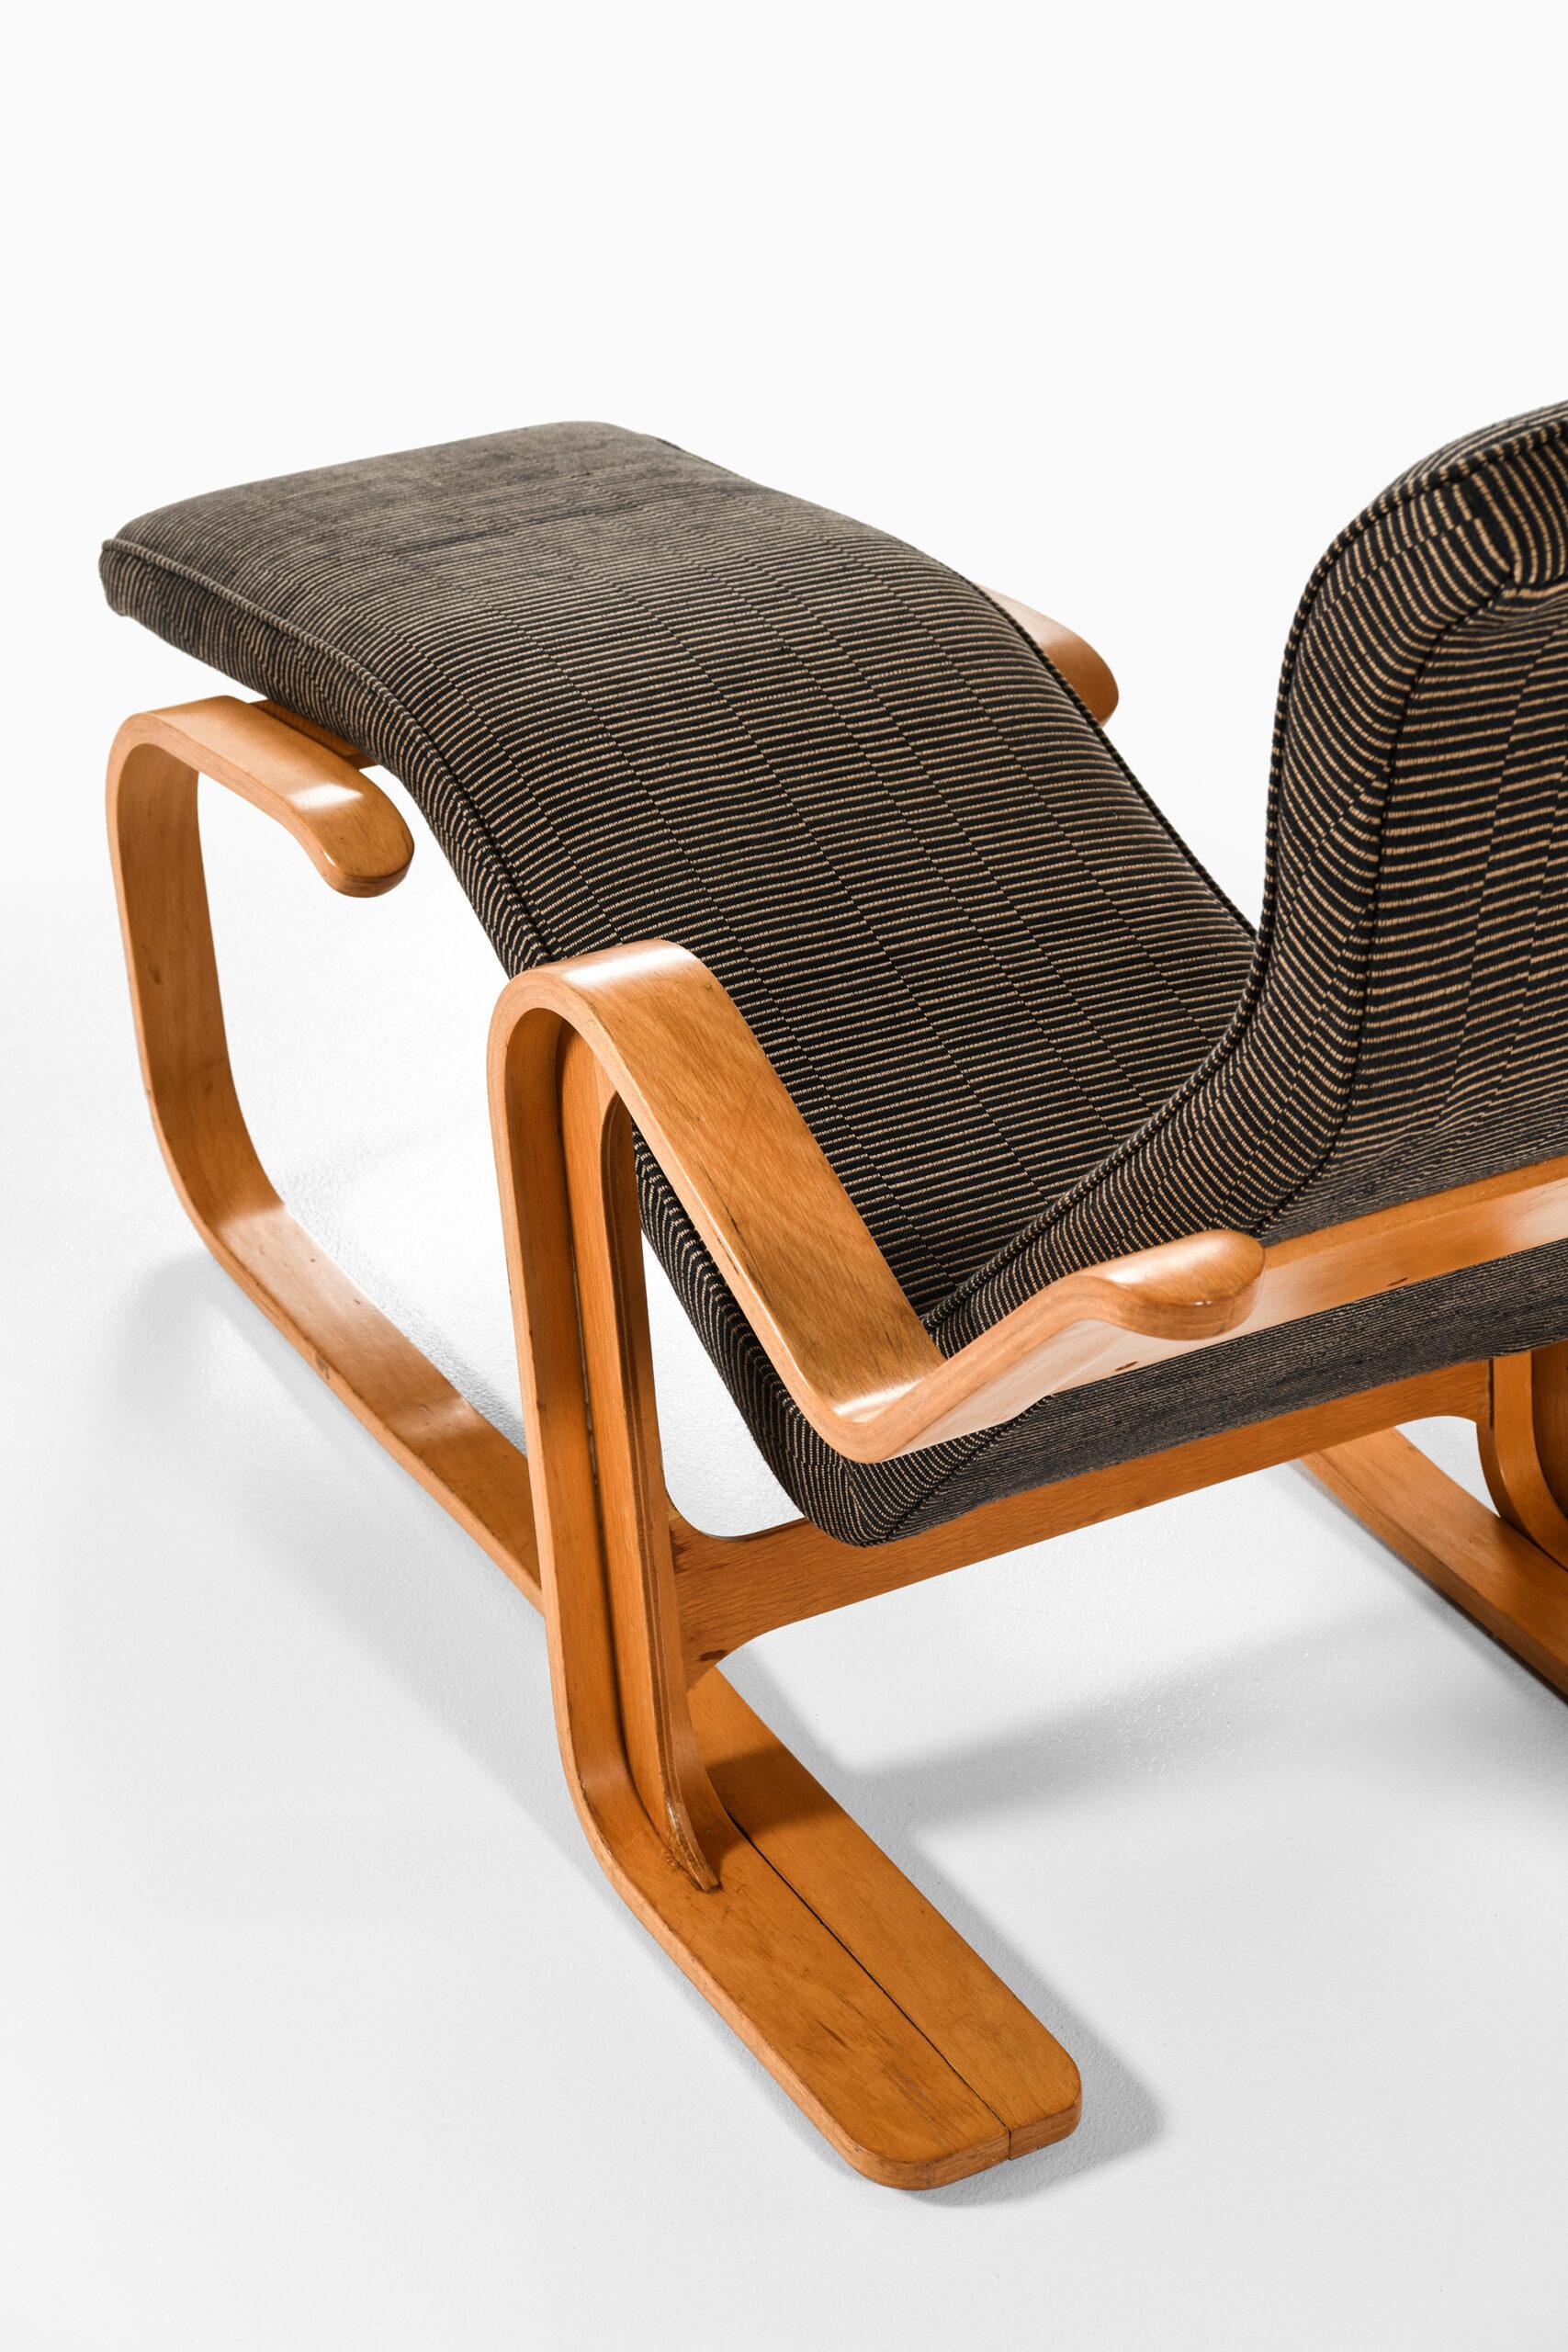 Mid-20th Century Marcel Breuer Lounge Chair Produced by Isokon For Sale